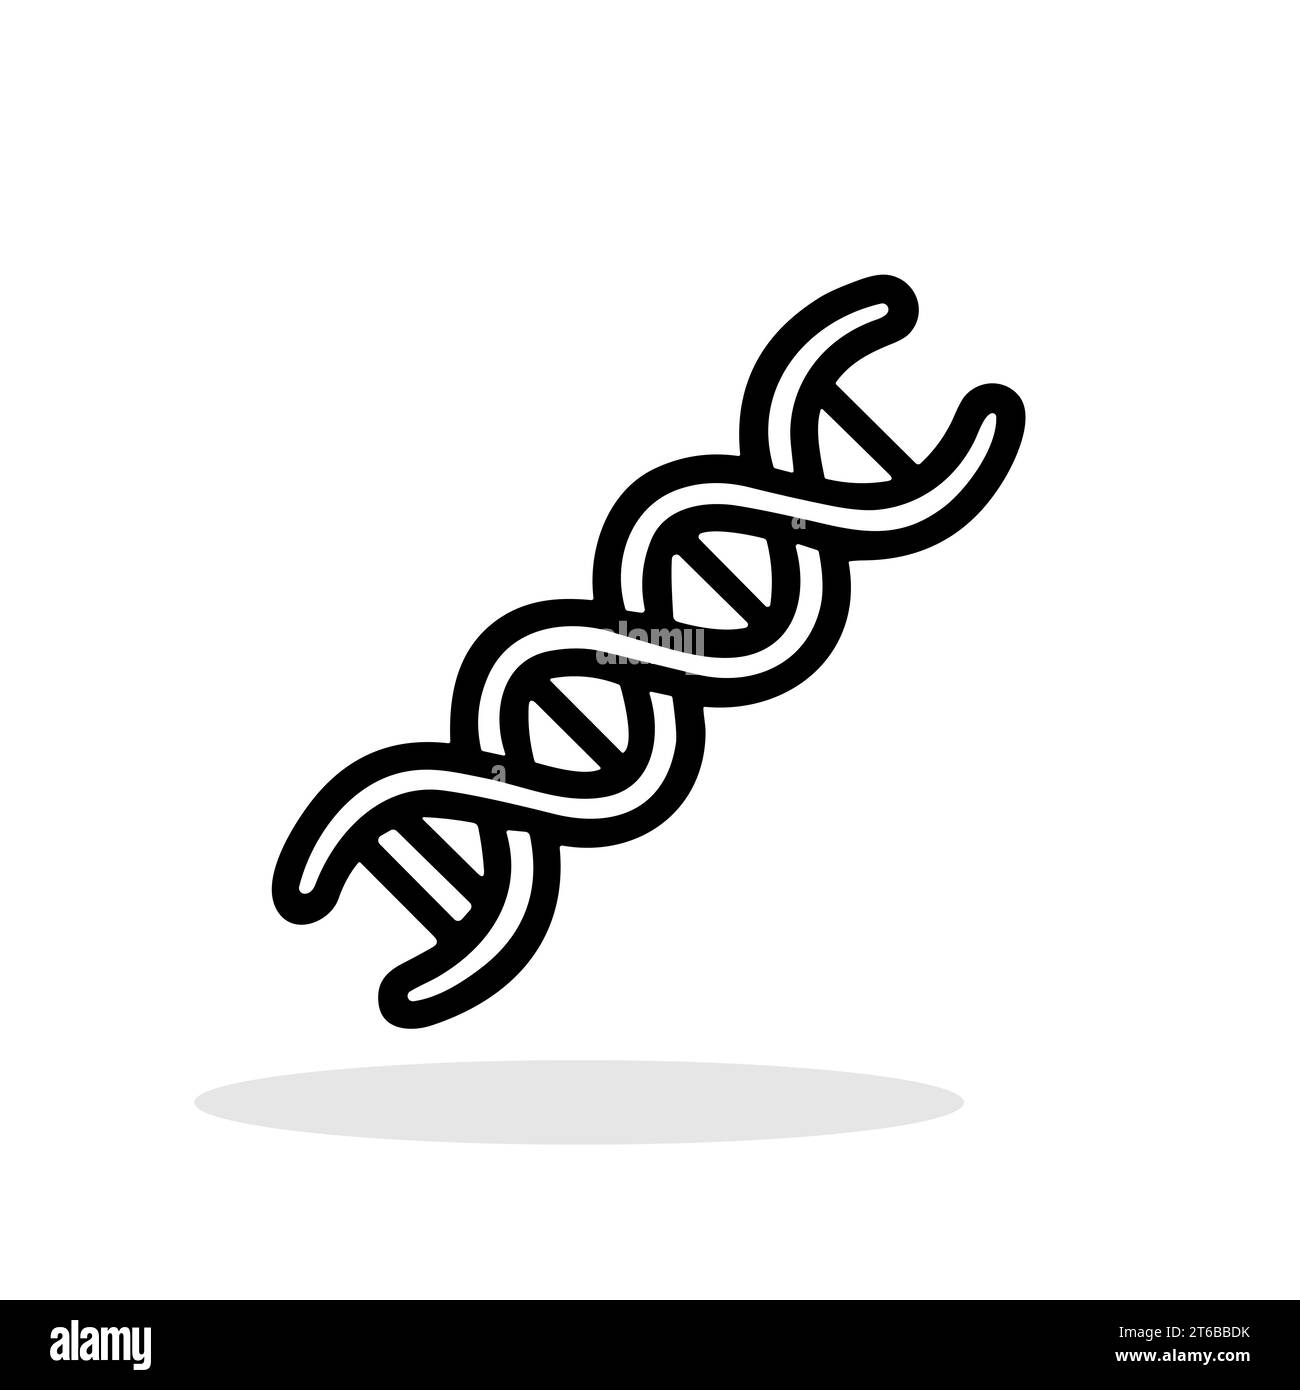 DNA strand icon. Black outline icon of a of DNA molecule structure. Vector illustration Stock Vector